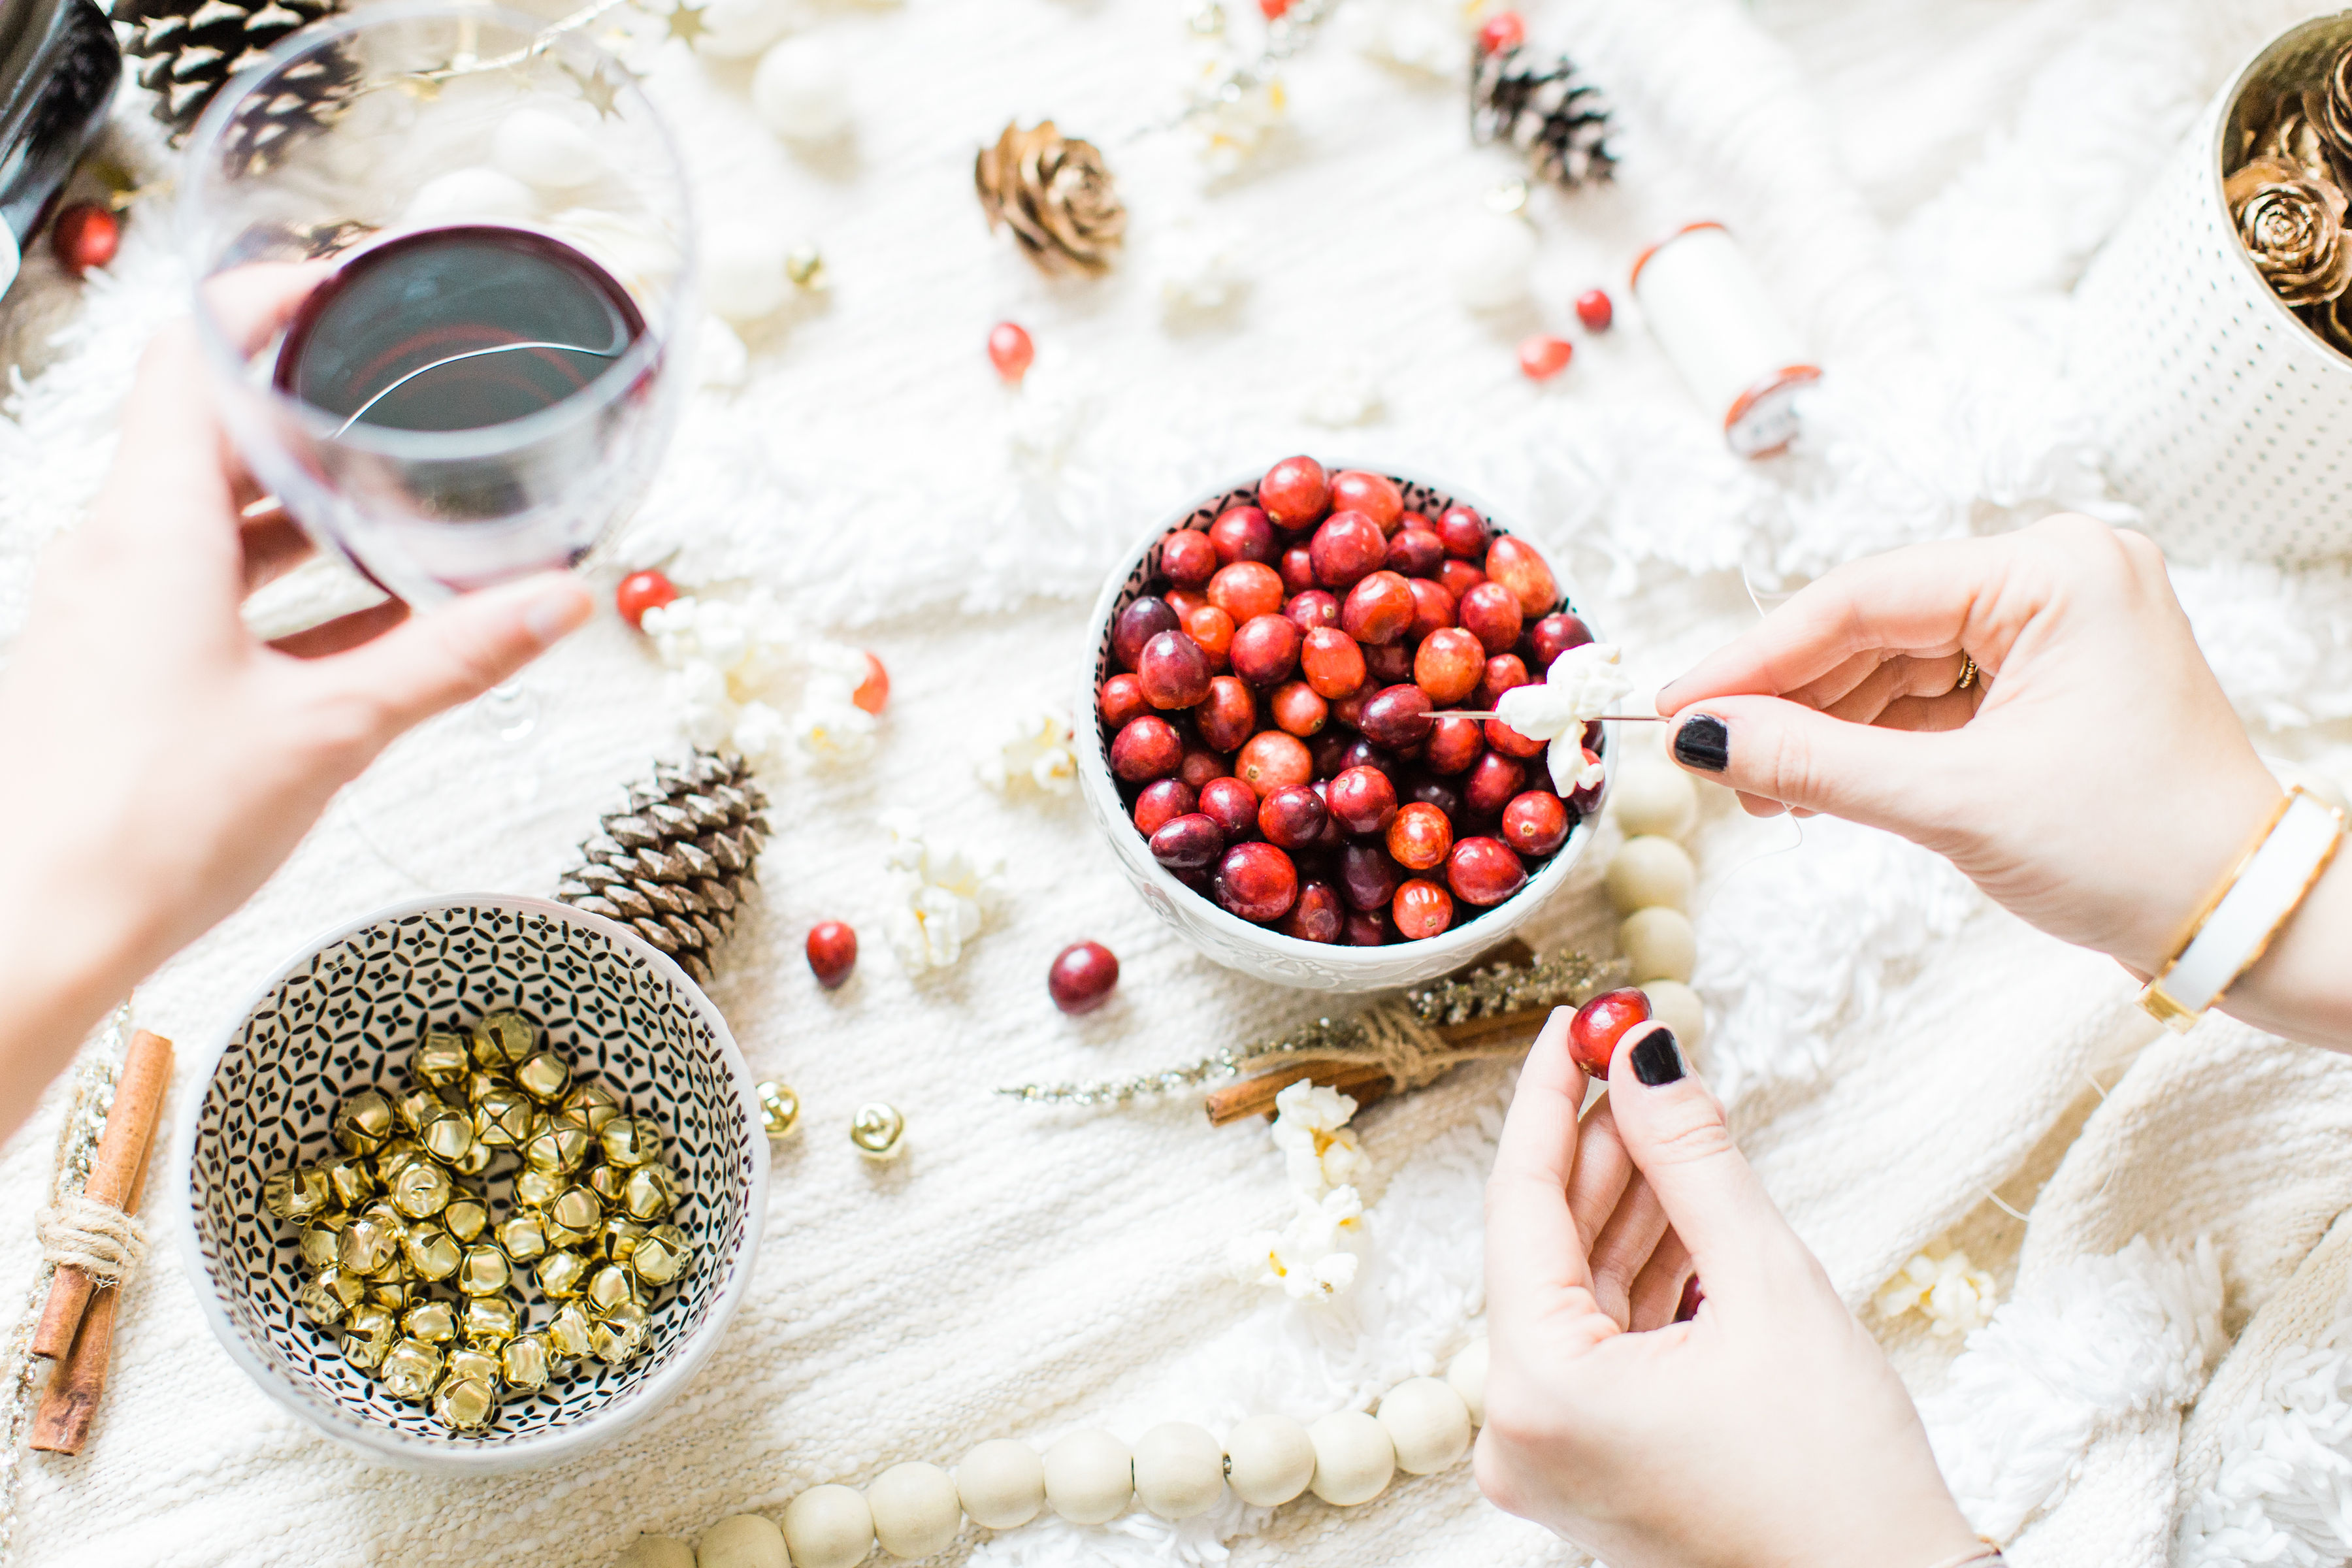 Looking for your next holiday party idea? Sip on wine and nibble on snacks while you make beautiful DIY holiday garlands with friends! (Bonus: The DIY holiday garland making party sets the stage for the perfect girls night in!) Click through for the details. #holidayparty #christmasparty #diychristmas #diyholidays #garland #holidaygarland #diyholidaygarland #diygarland #christmasgarland #holidaygirlsnight #christmasgirlsnight | glitterinc.com | @glitterinc